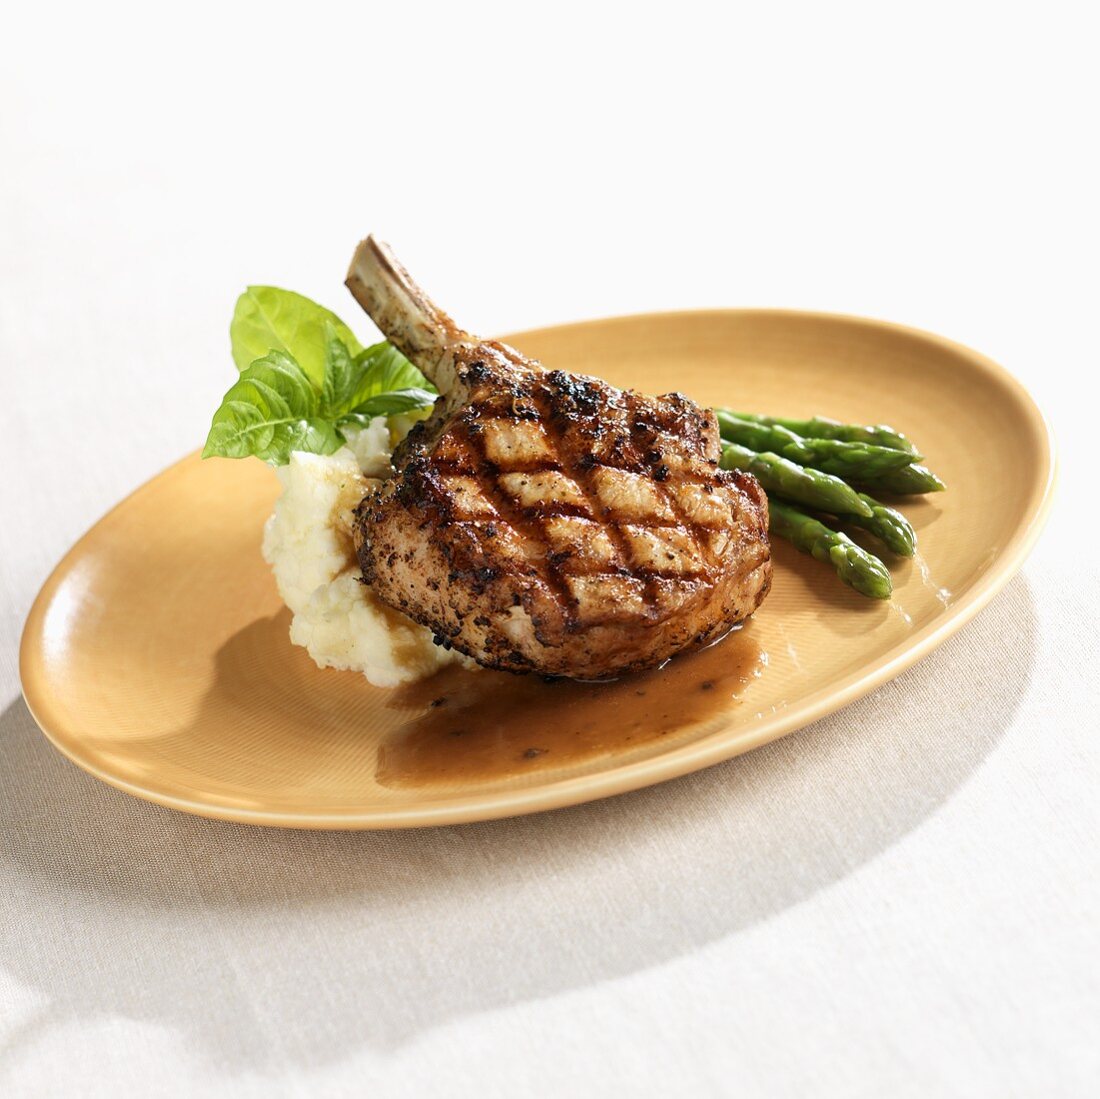 Fire Grilled Veal Chop with Mashed Potatoes and Asparagus